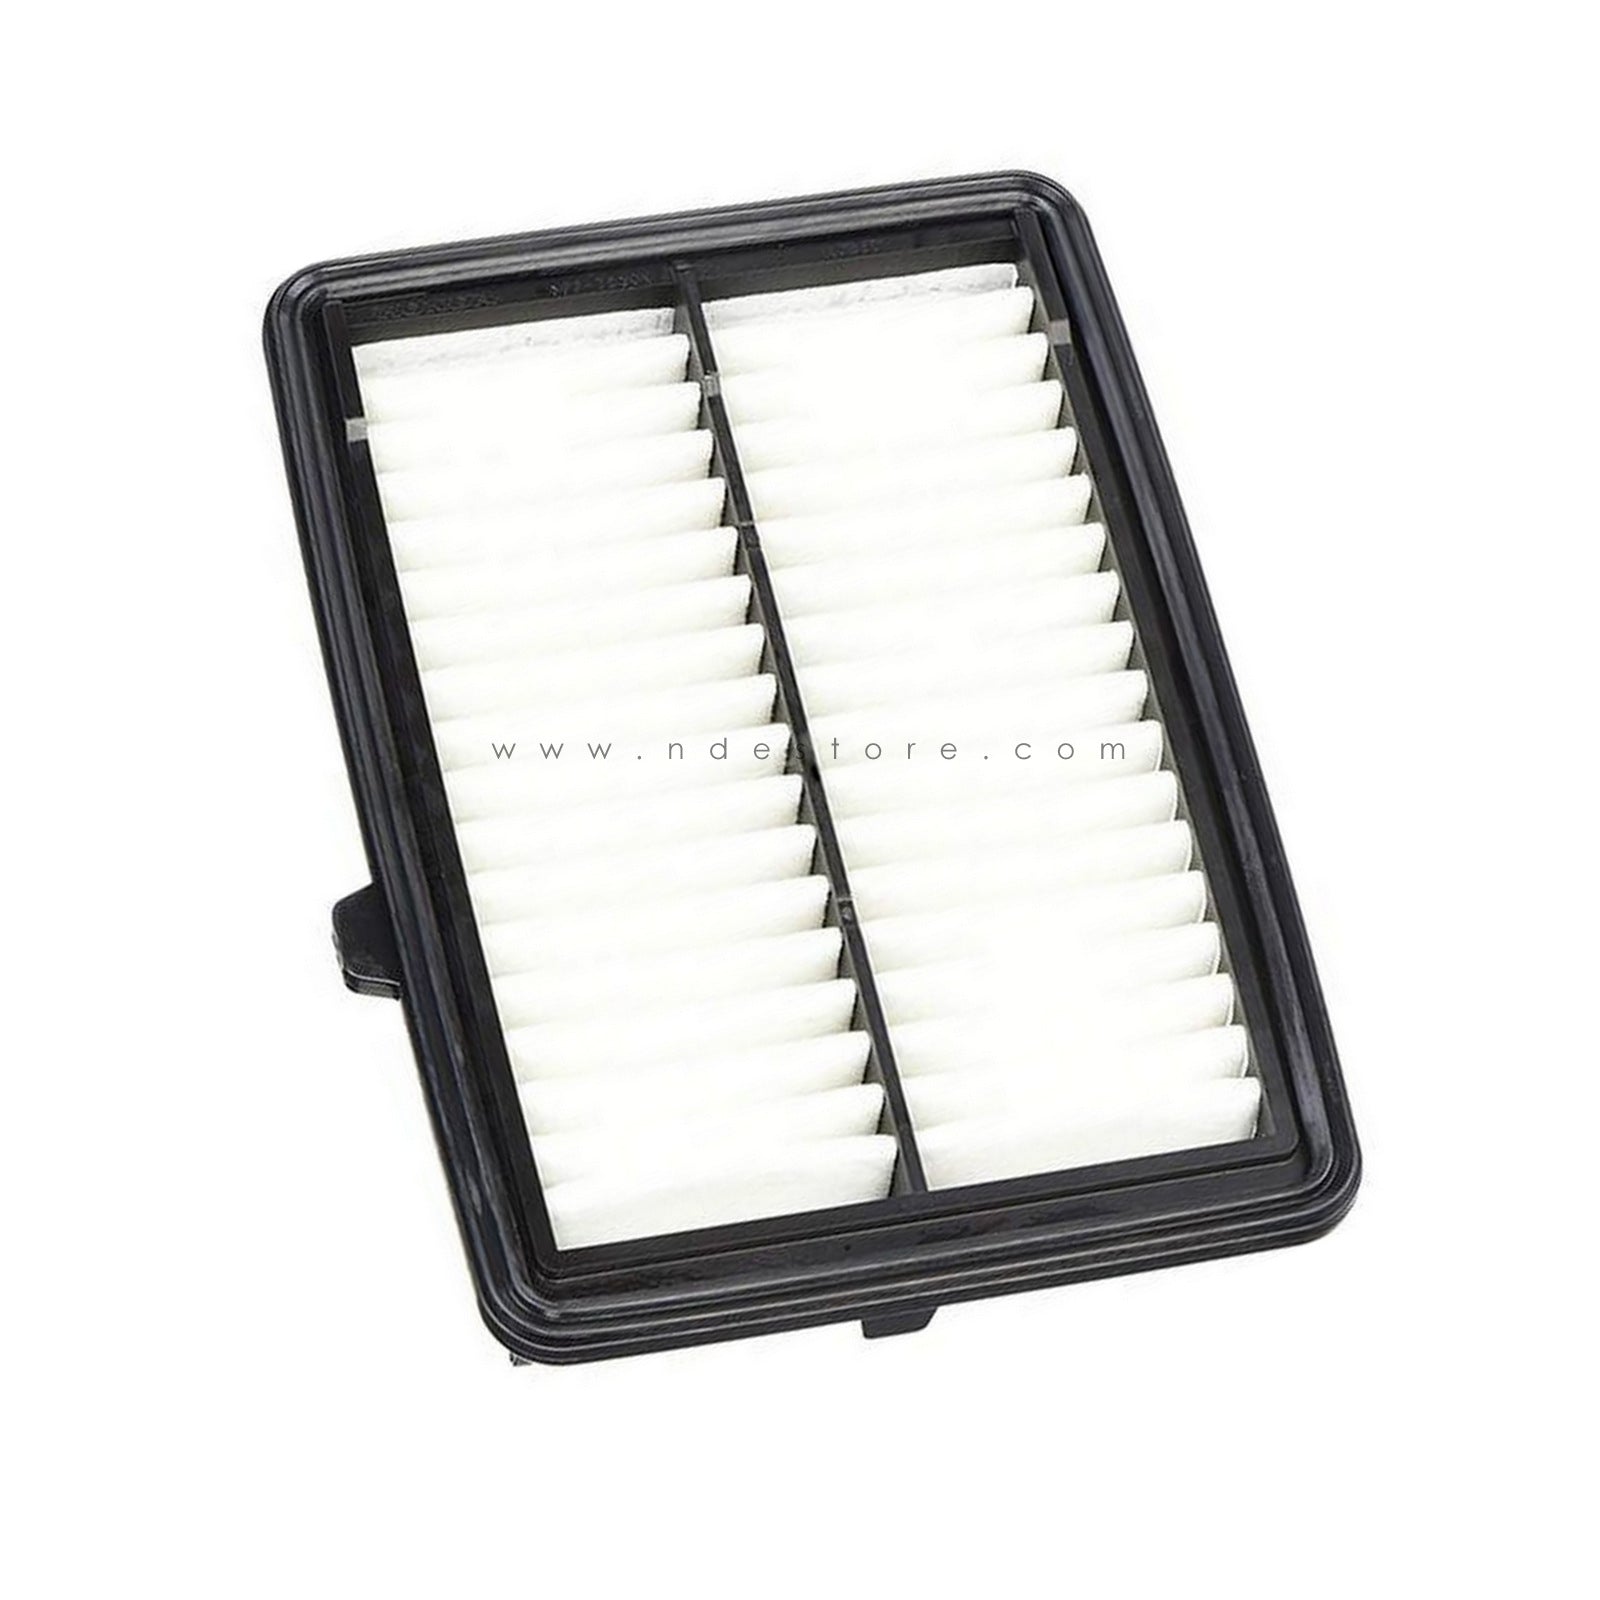 AIR FILTER ELEMENT SUB ASSY FOR HONDA VEZEL (IMPORTED) (2013-2020)